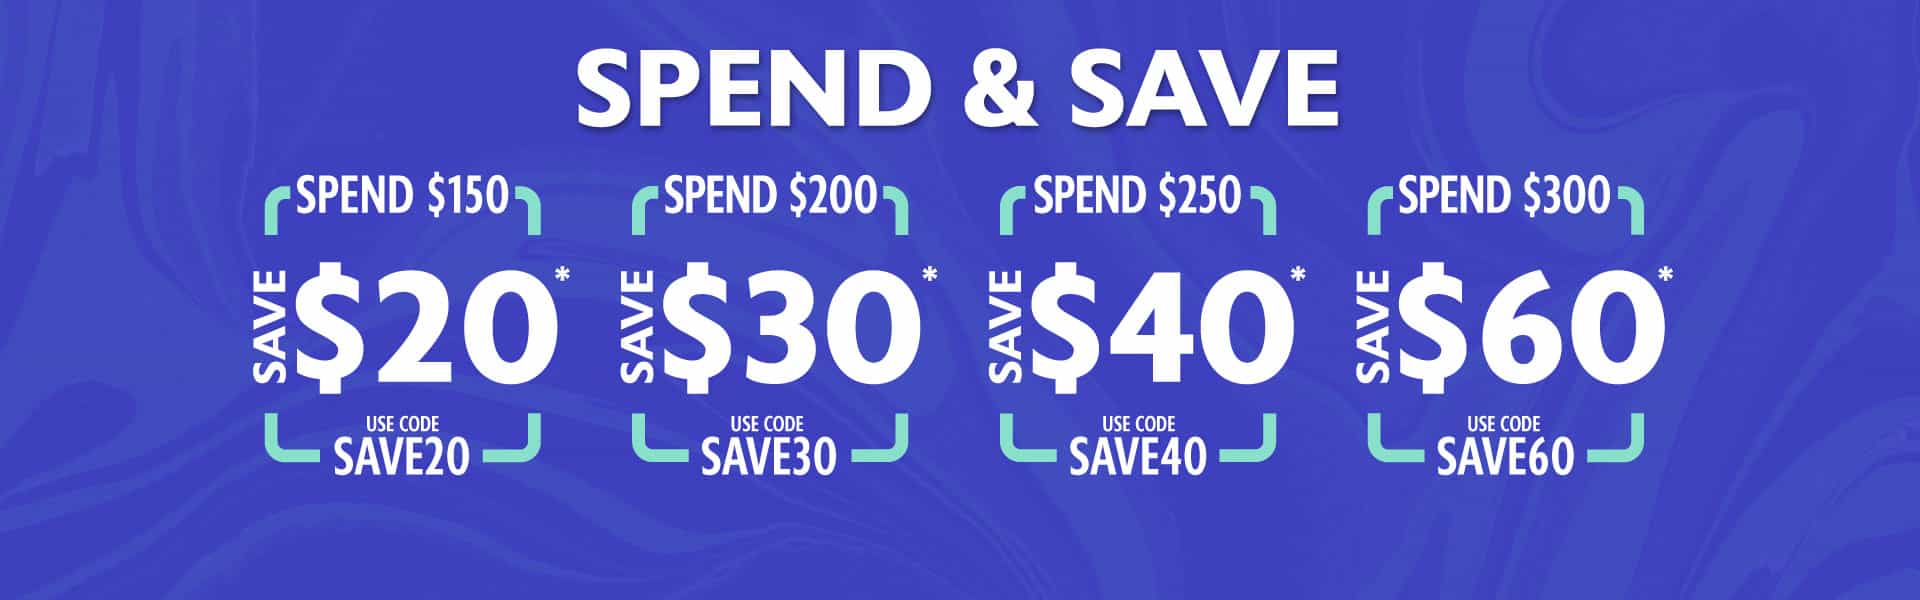 Sportitude Spend & save up to $60 OFF with discount codes on shoes, clothing & more